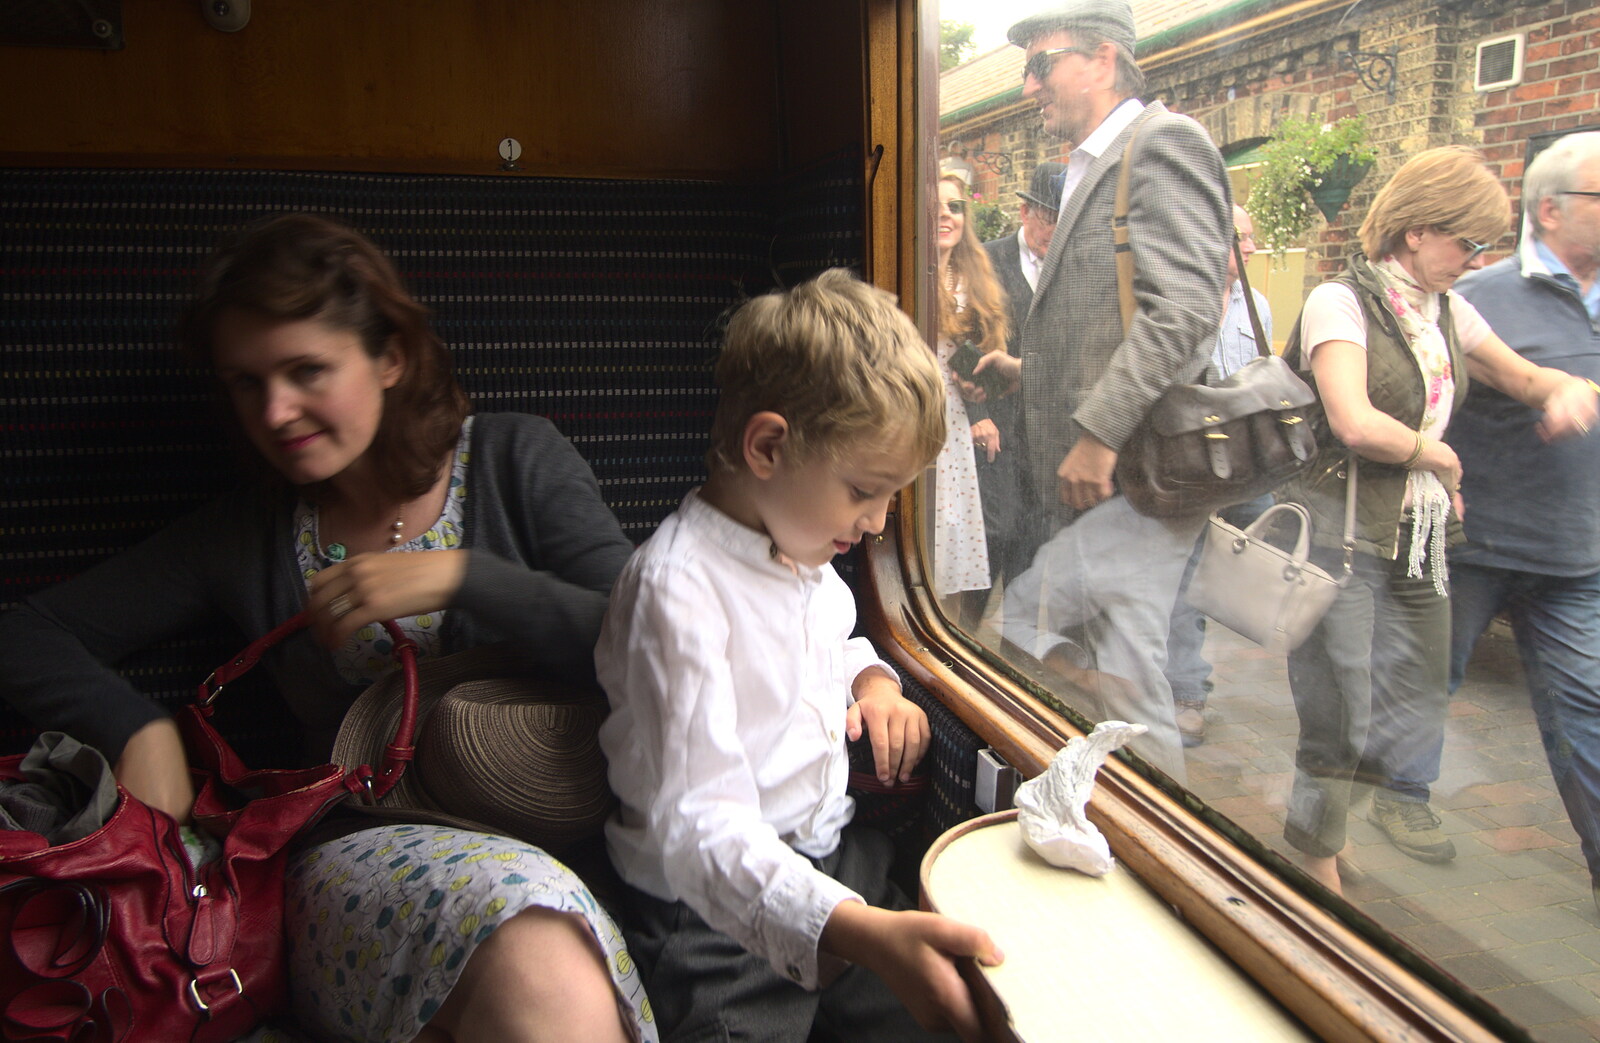 Isobel and Fred in the carriage from A Steamy 1940s Day Out, Holt and Sheringham, Norfolk - 20th September 2015